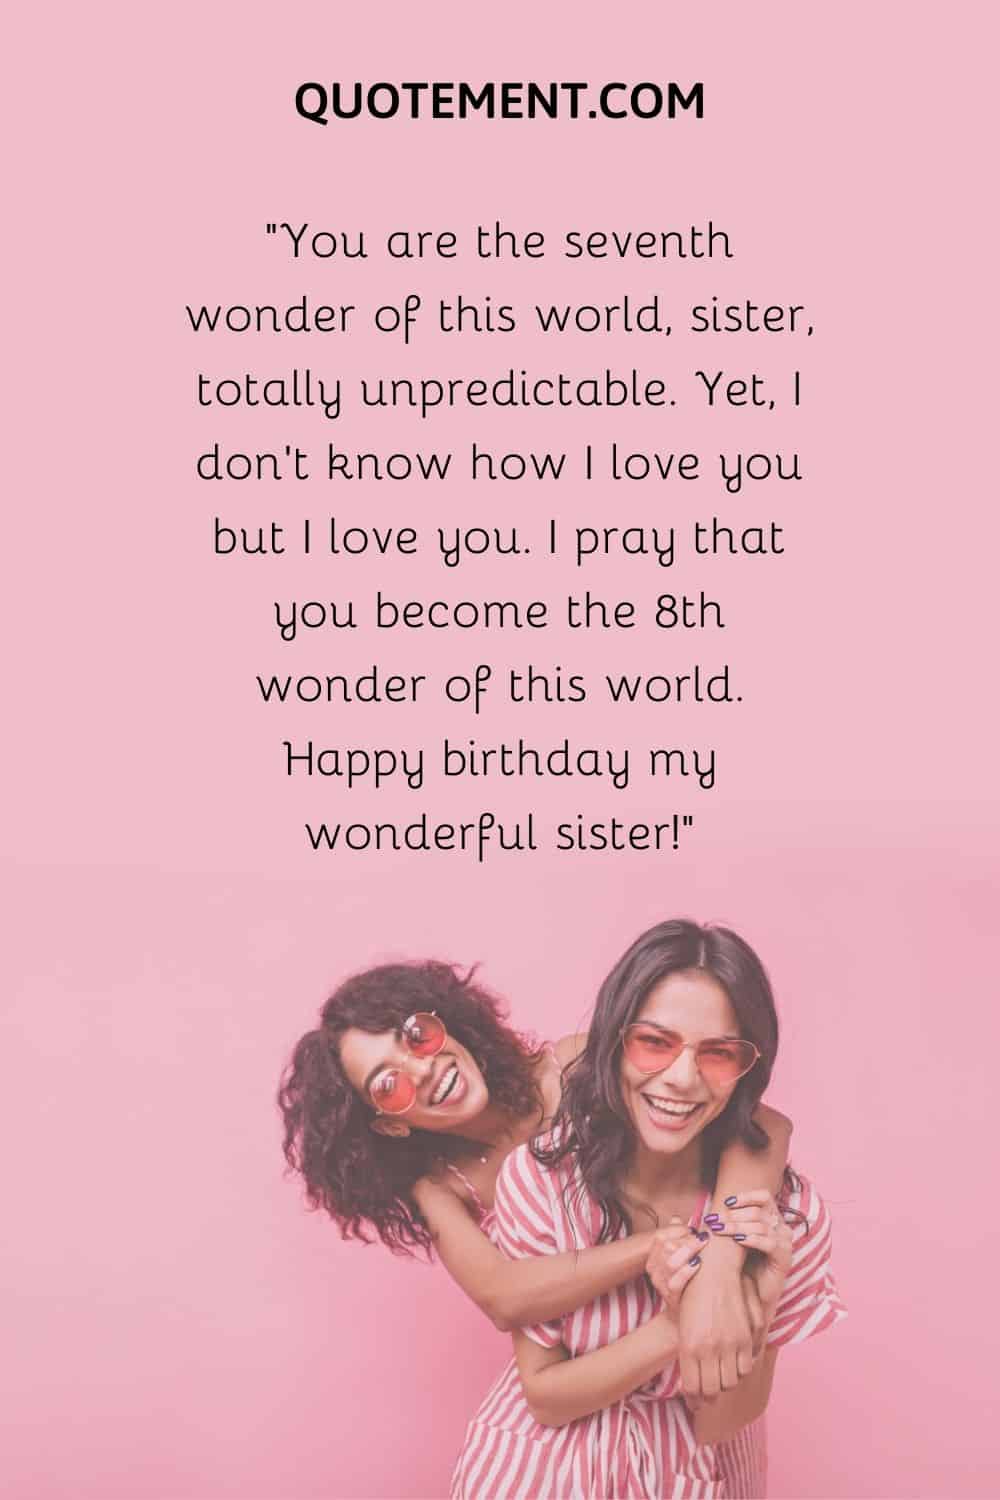 You are the seventh wonder of this world, sister,